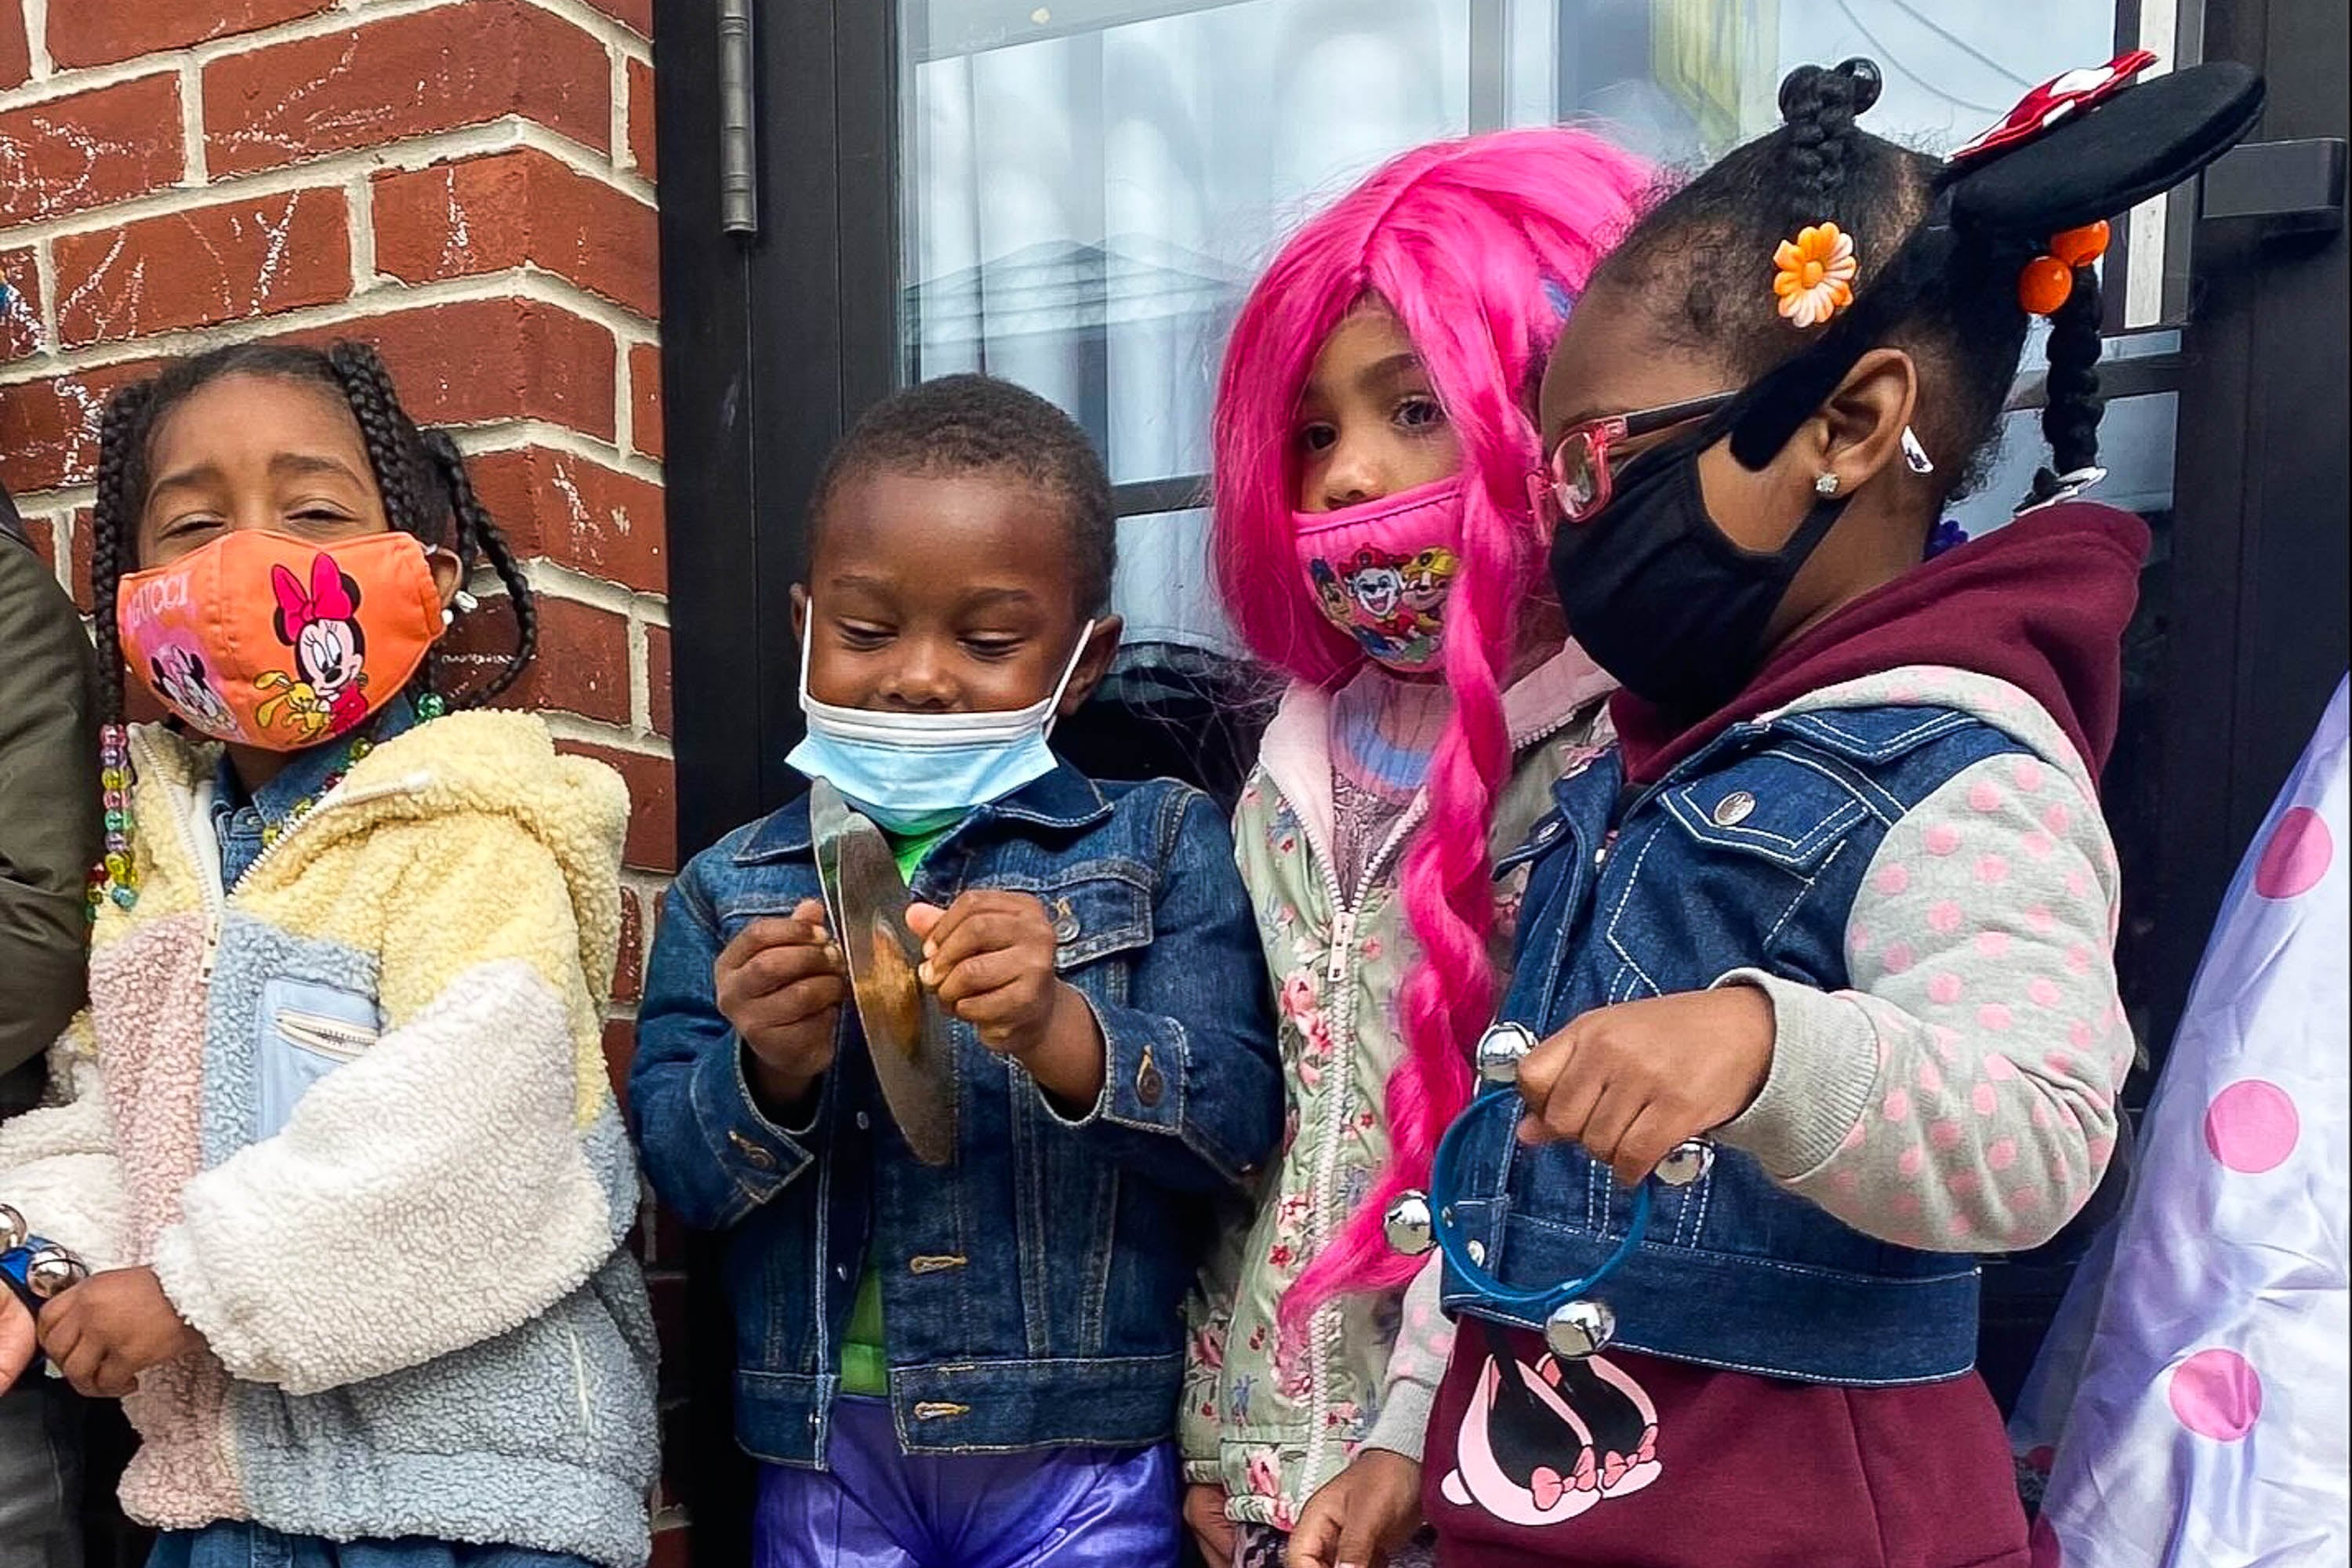 Four preschoolers, each wearing protective masks, stand side-by-side next to a brick wall and window.